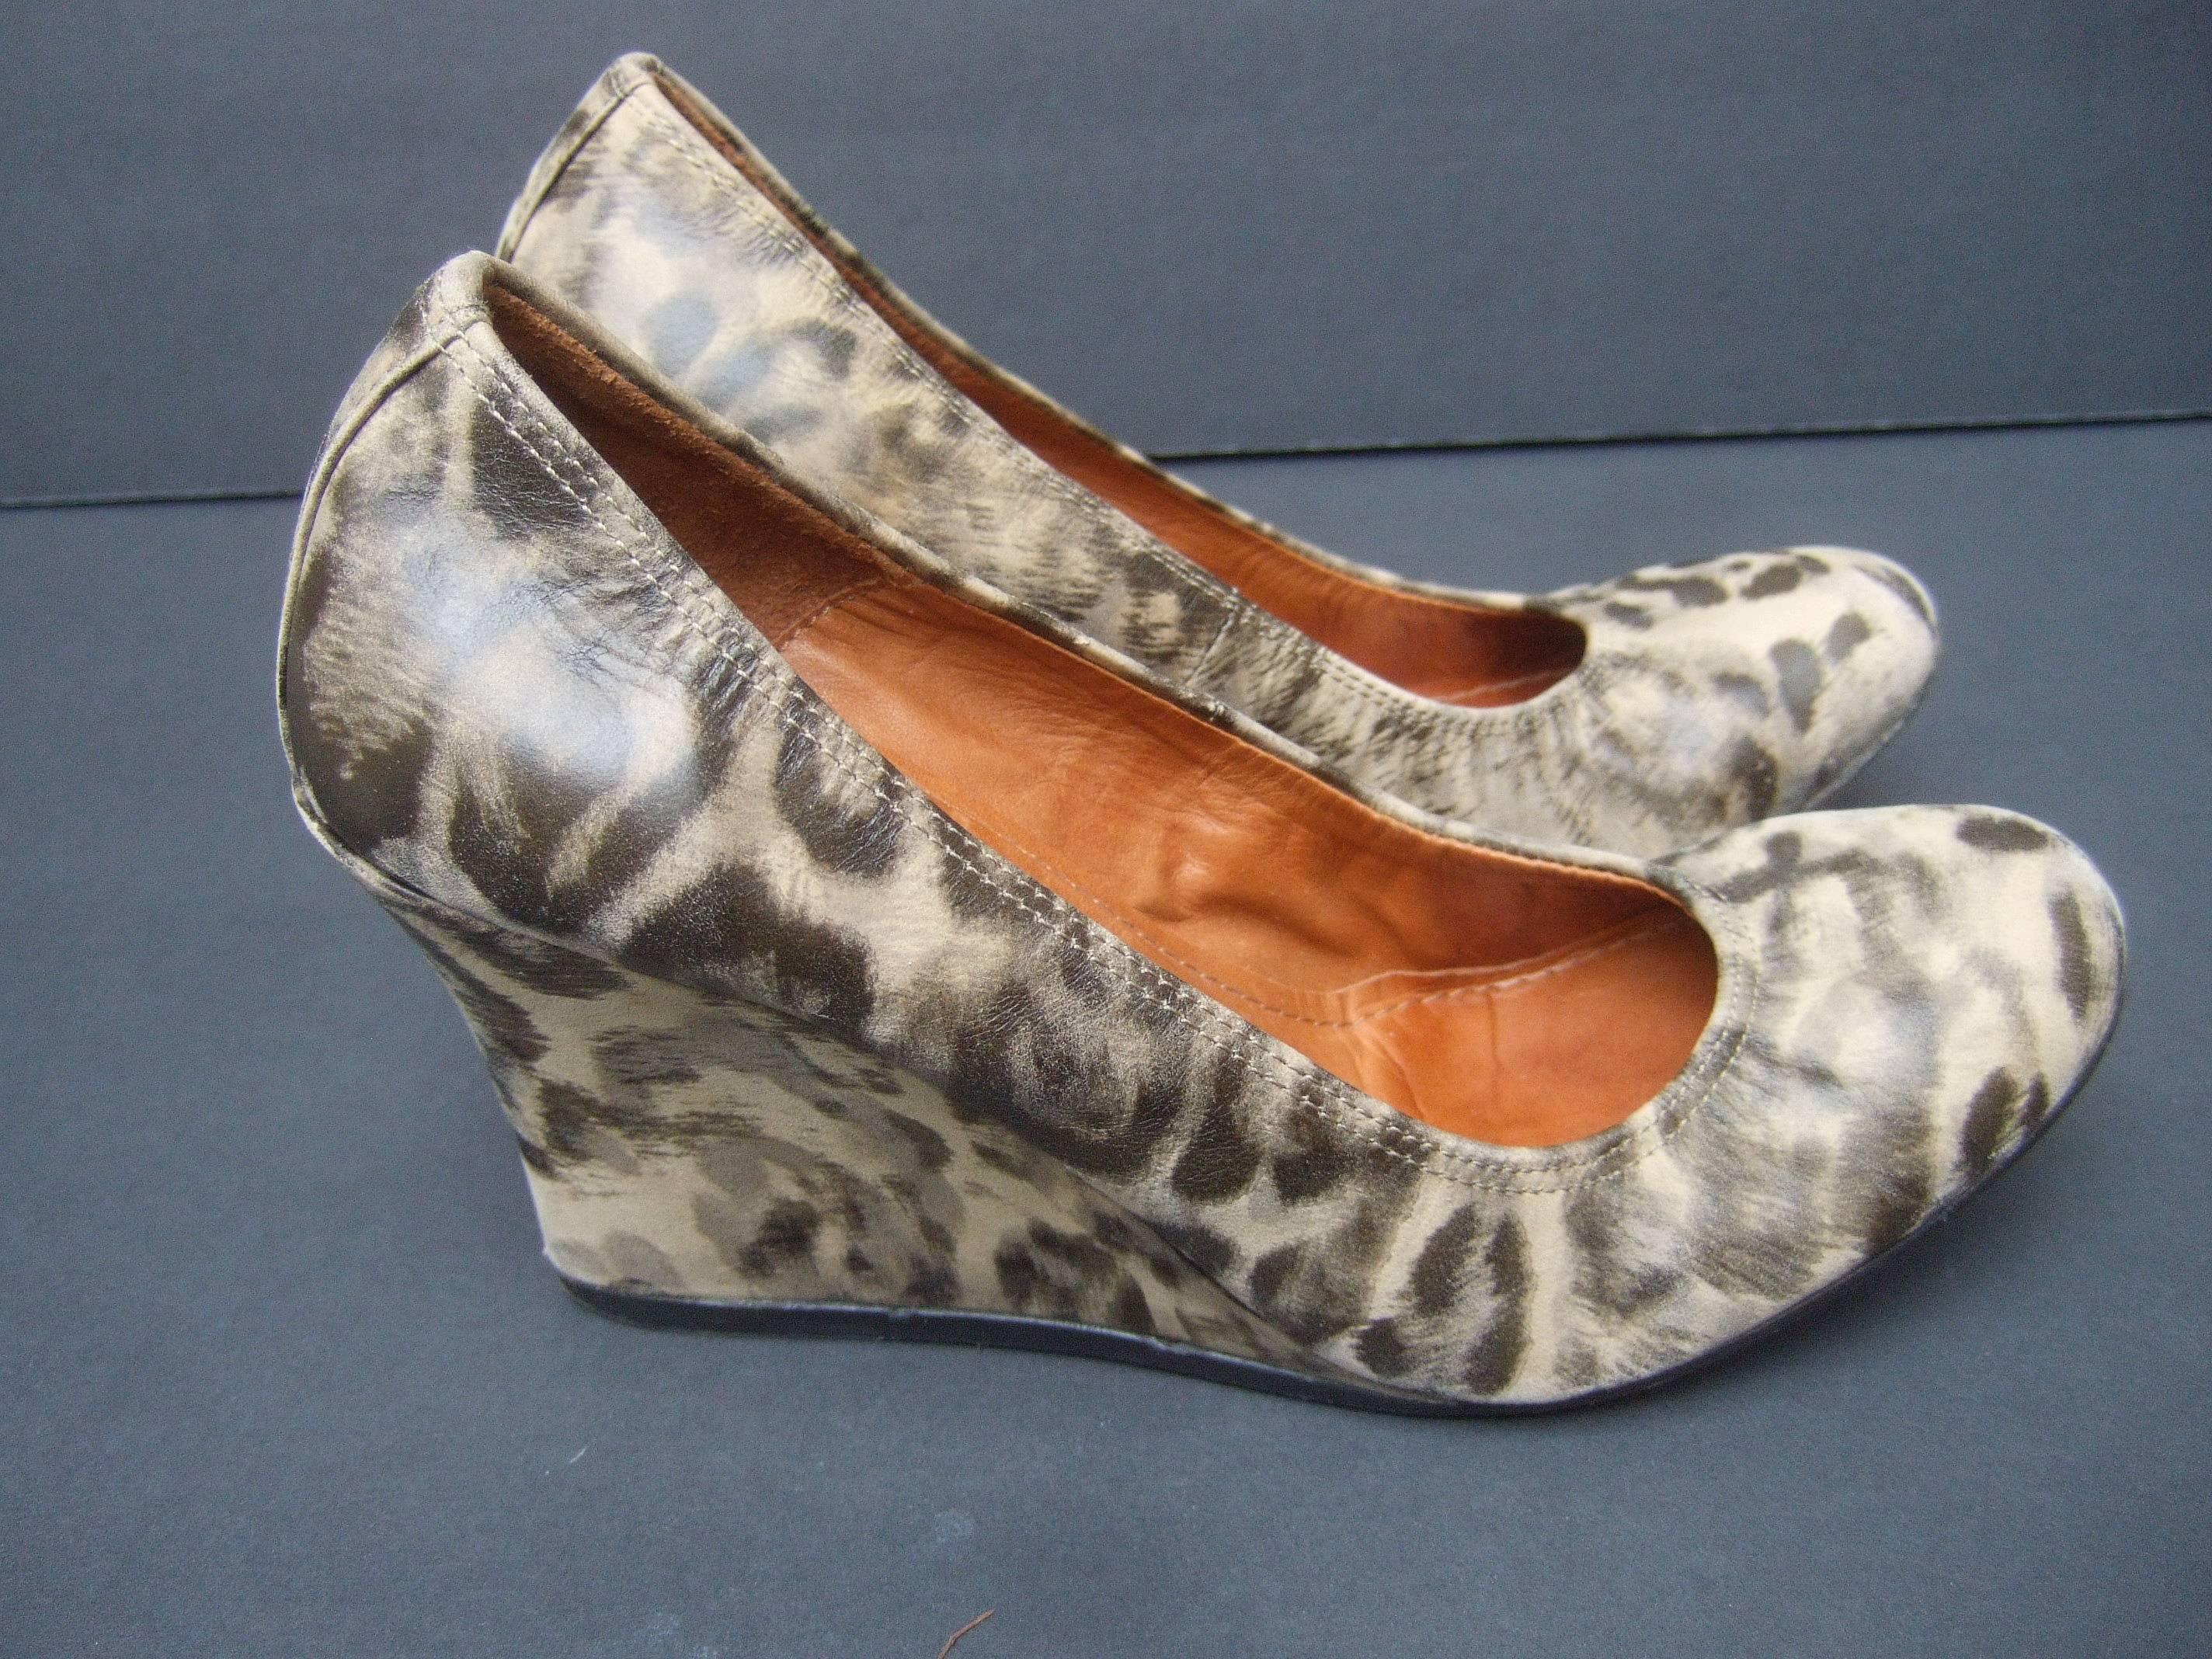 Lanvin Paris Animal print leather wedges ca 1970s US Size 7 
The stylish high fashion shoes are designed with
animal print stamped leather

The front of the designer shoes have an elastic 
band that stretches around the lower front section
The